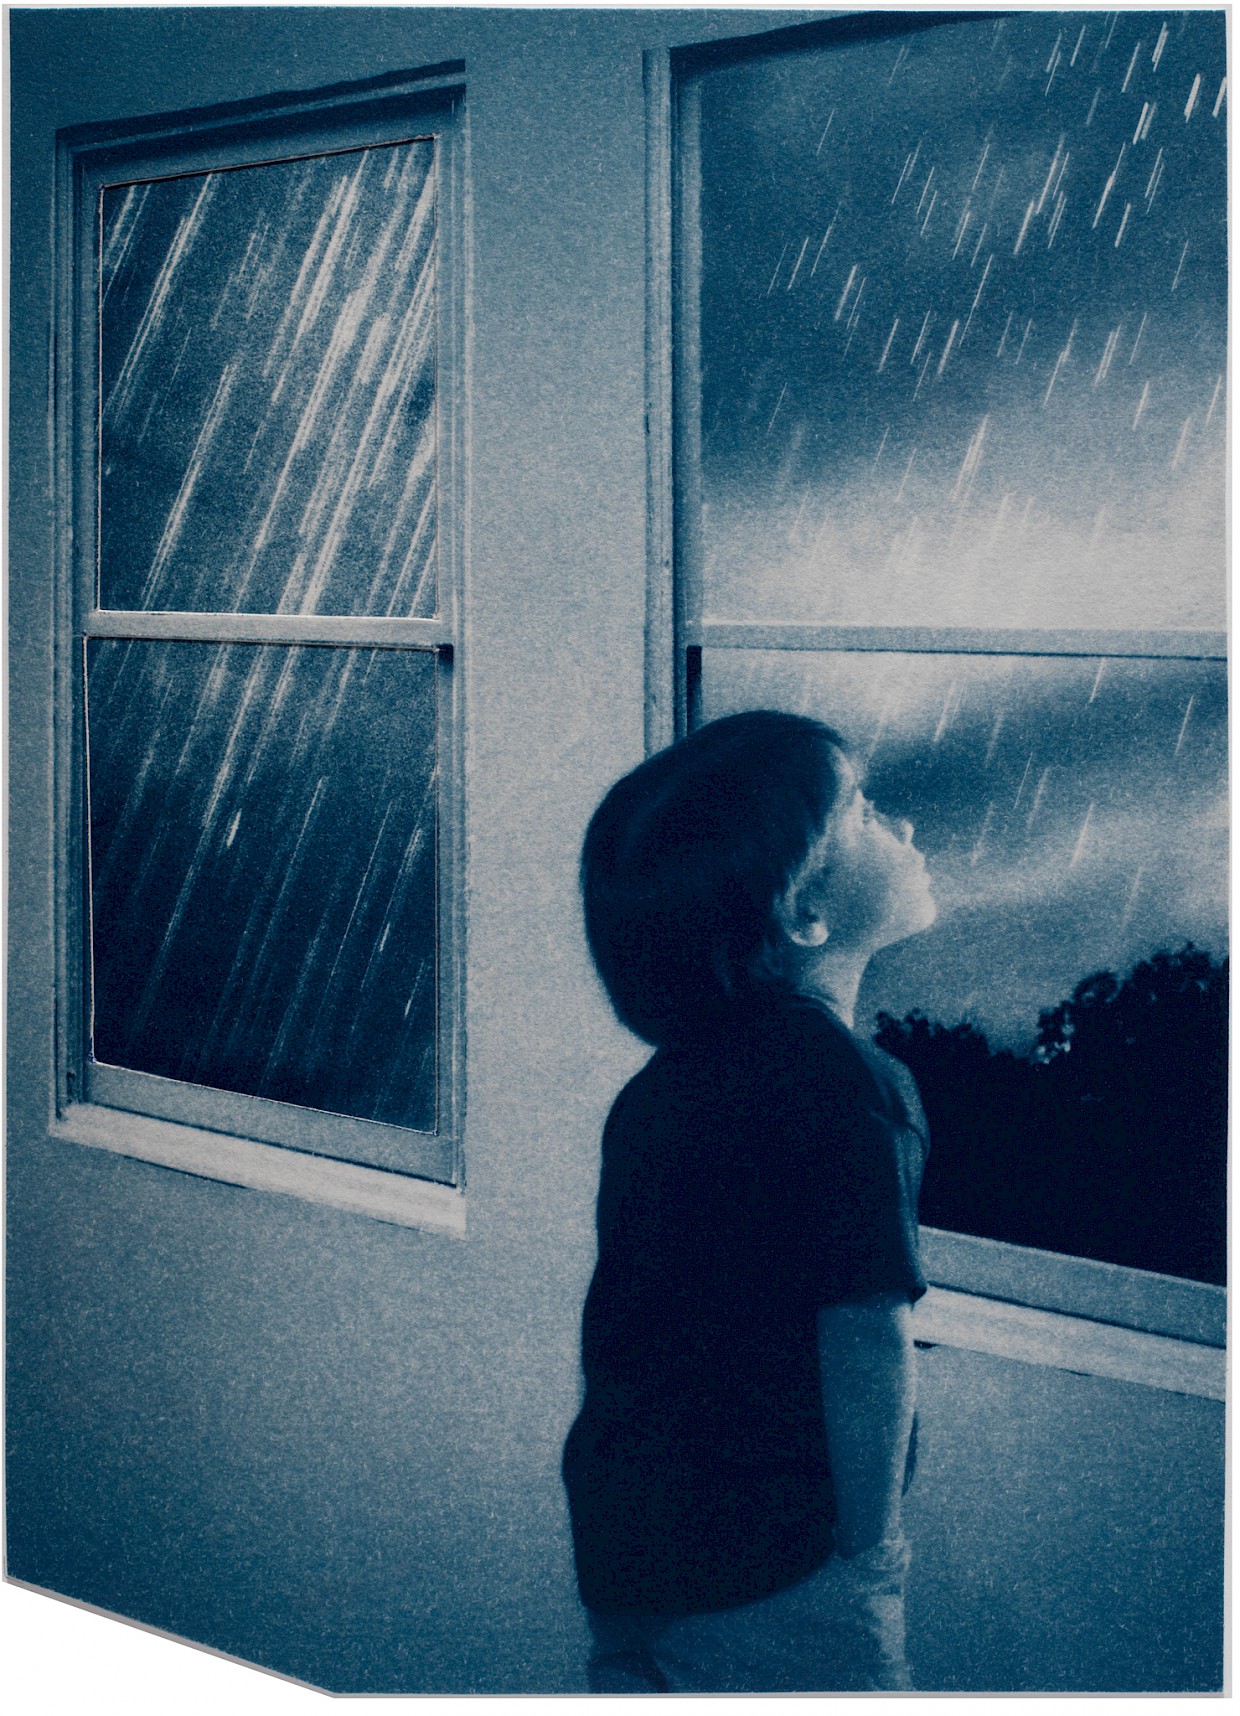 boy looking out window while it is raining